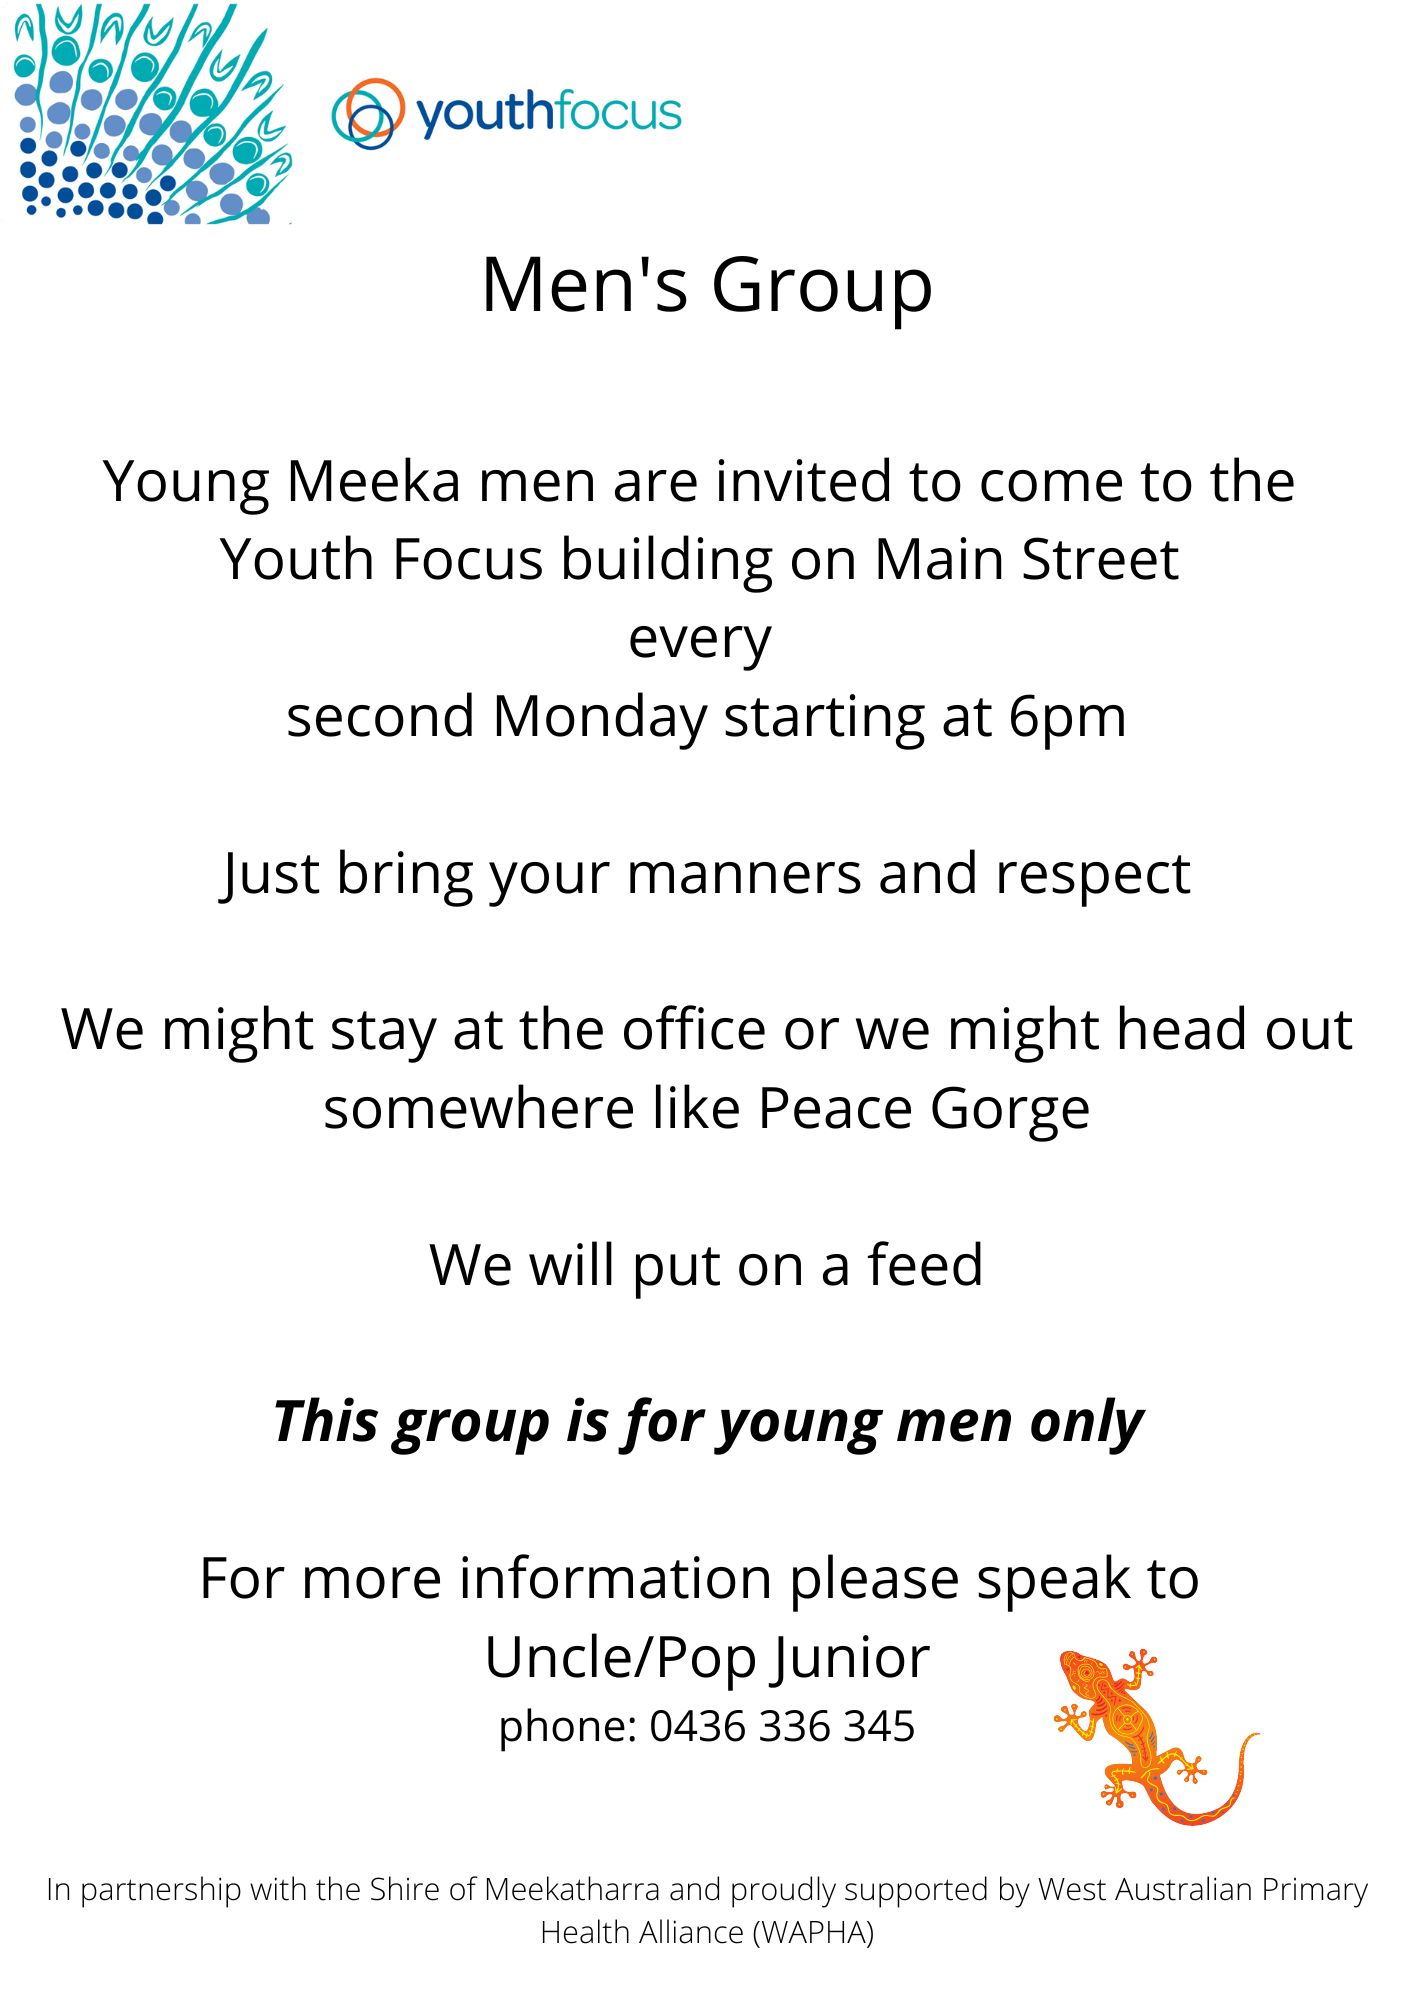 Youth Focus Men's Group